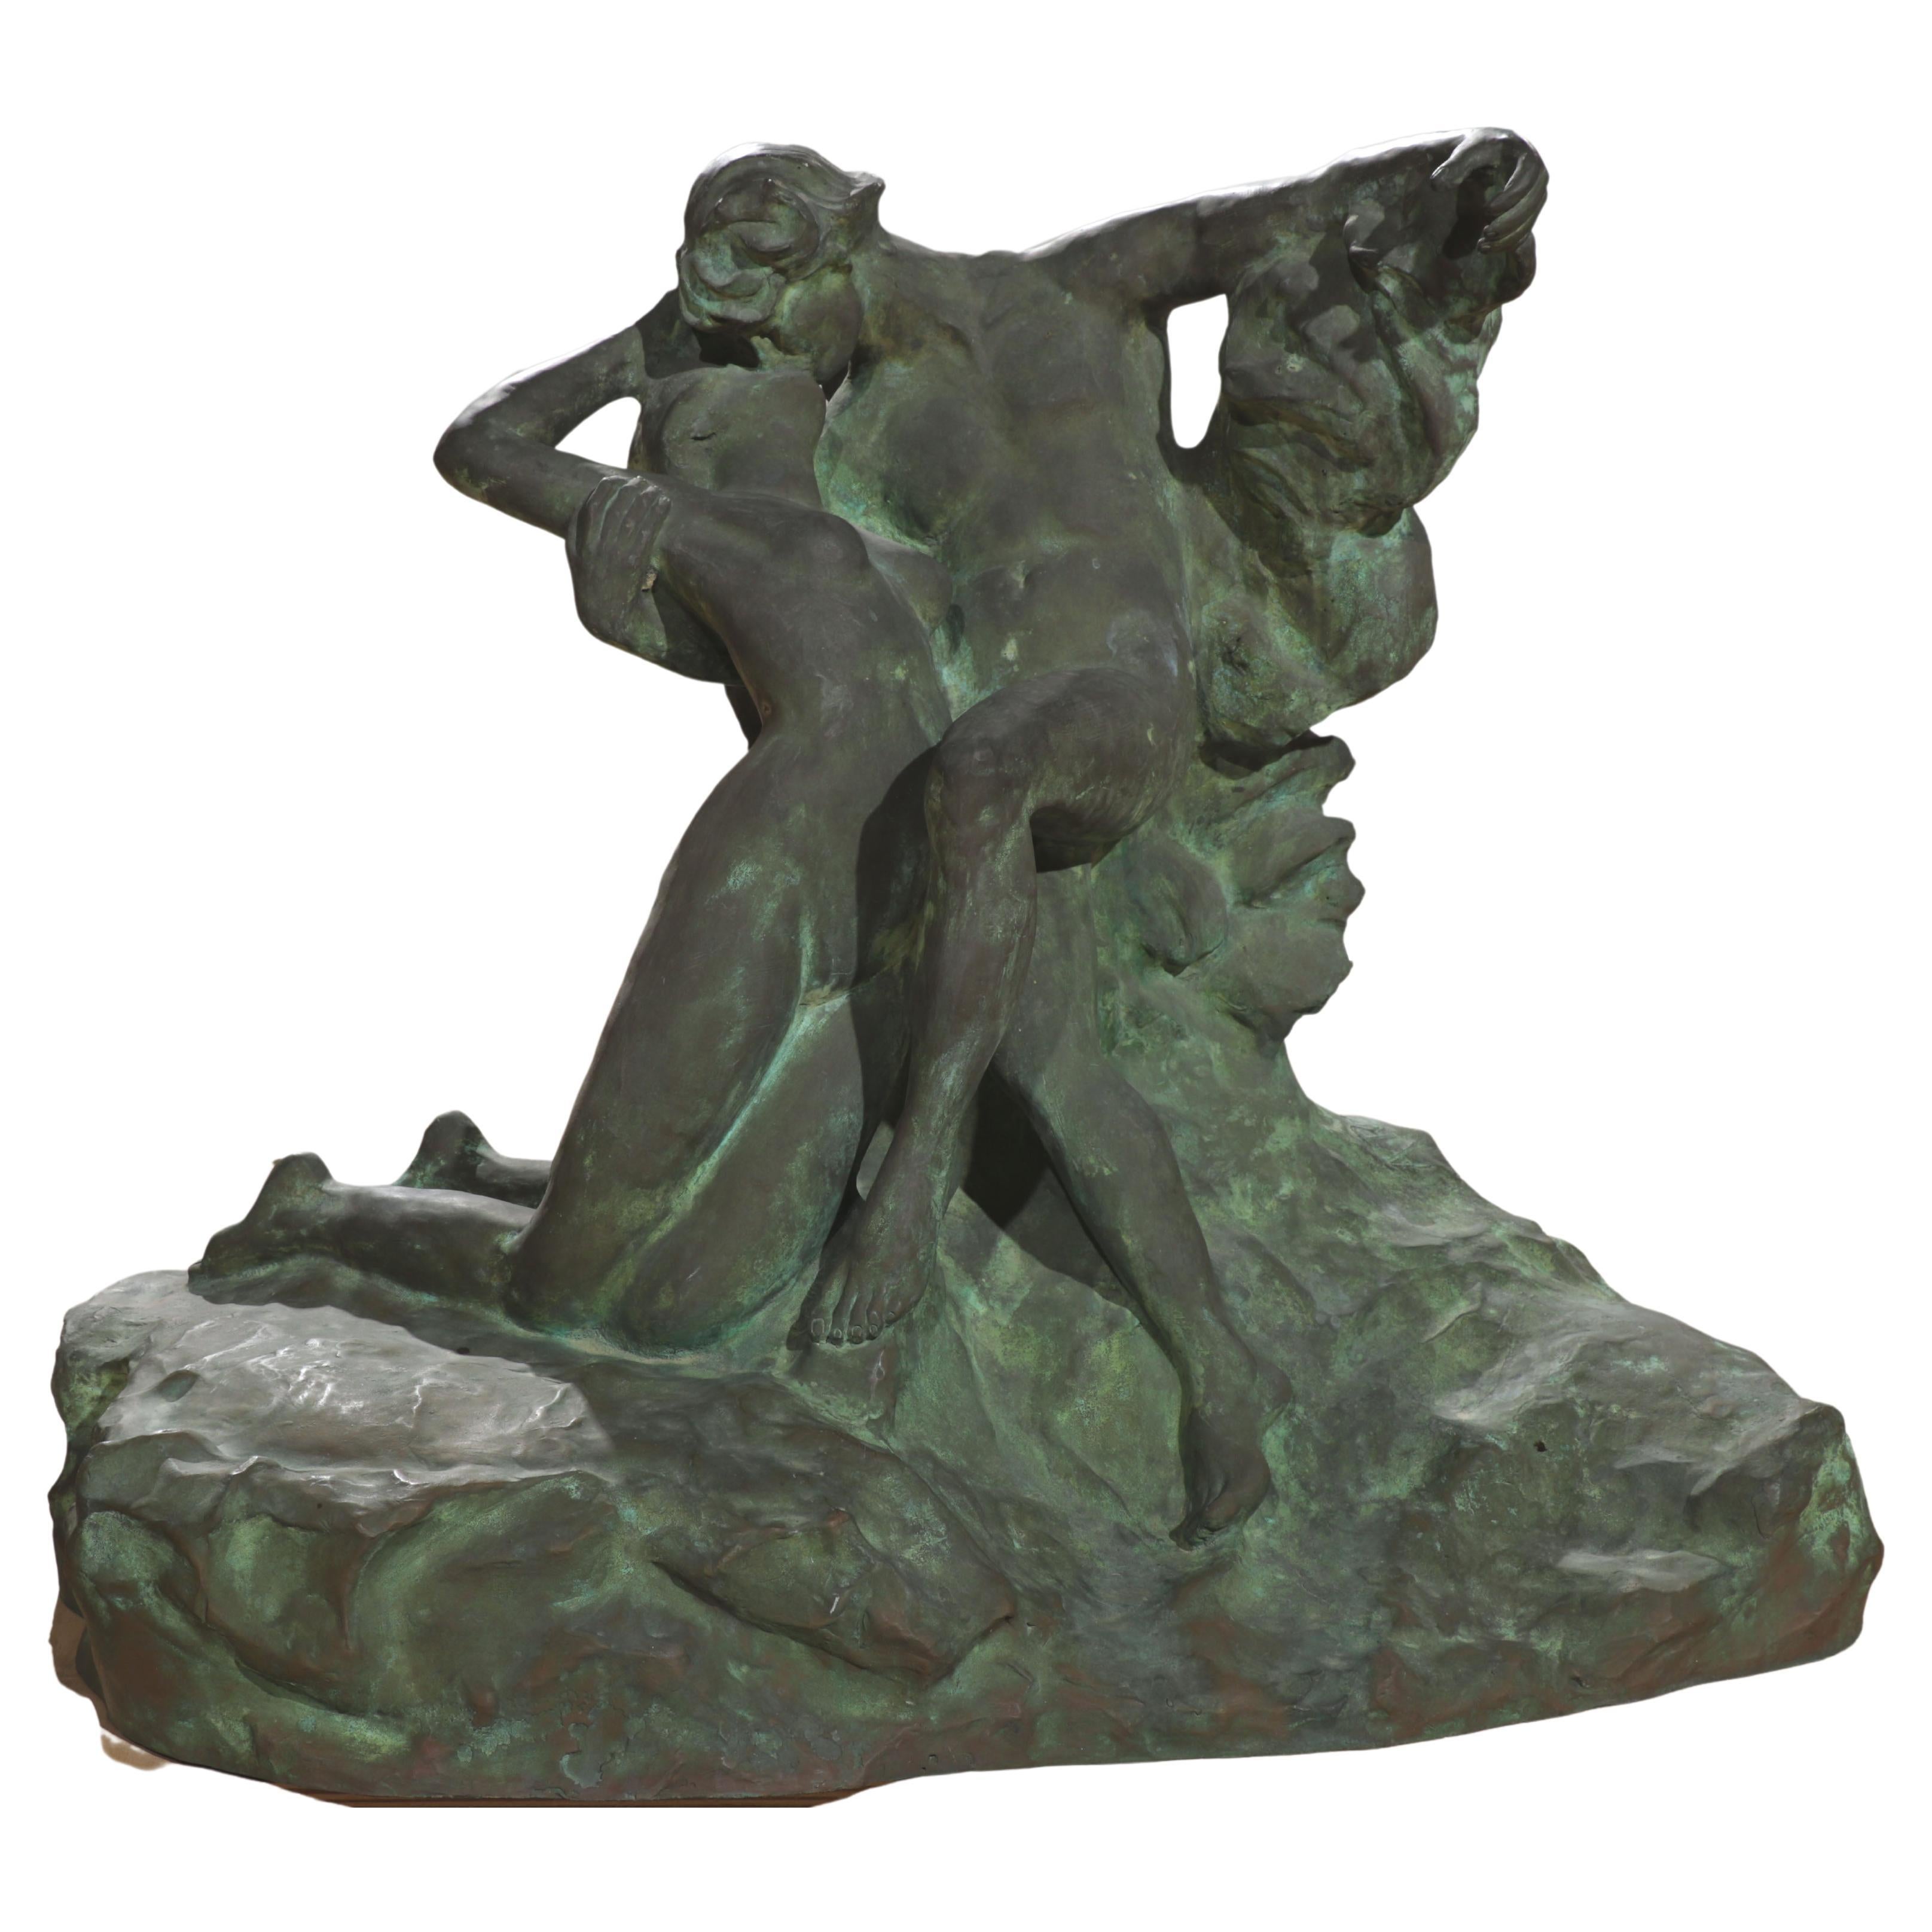 This is a bronze statue Auguste Rodin Eternal Springtime reproduction. It is based on the couple, Paolo and Francesca, the passionate lovers from the fifth canto of Dante's Inferno. This sculpture was cast in the traditional Lost Wax process with